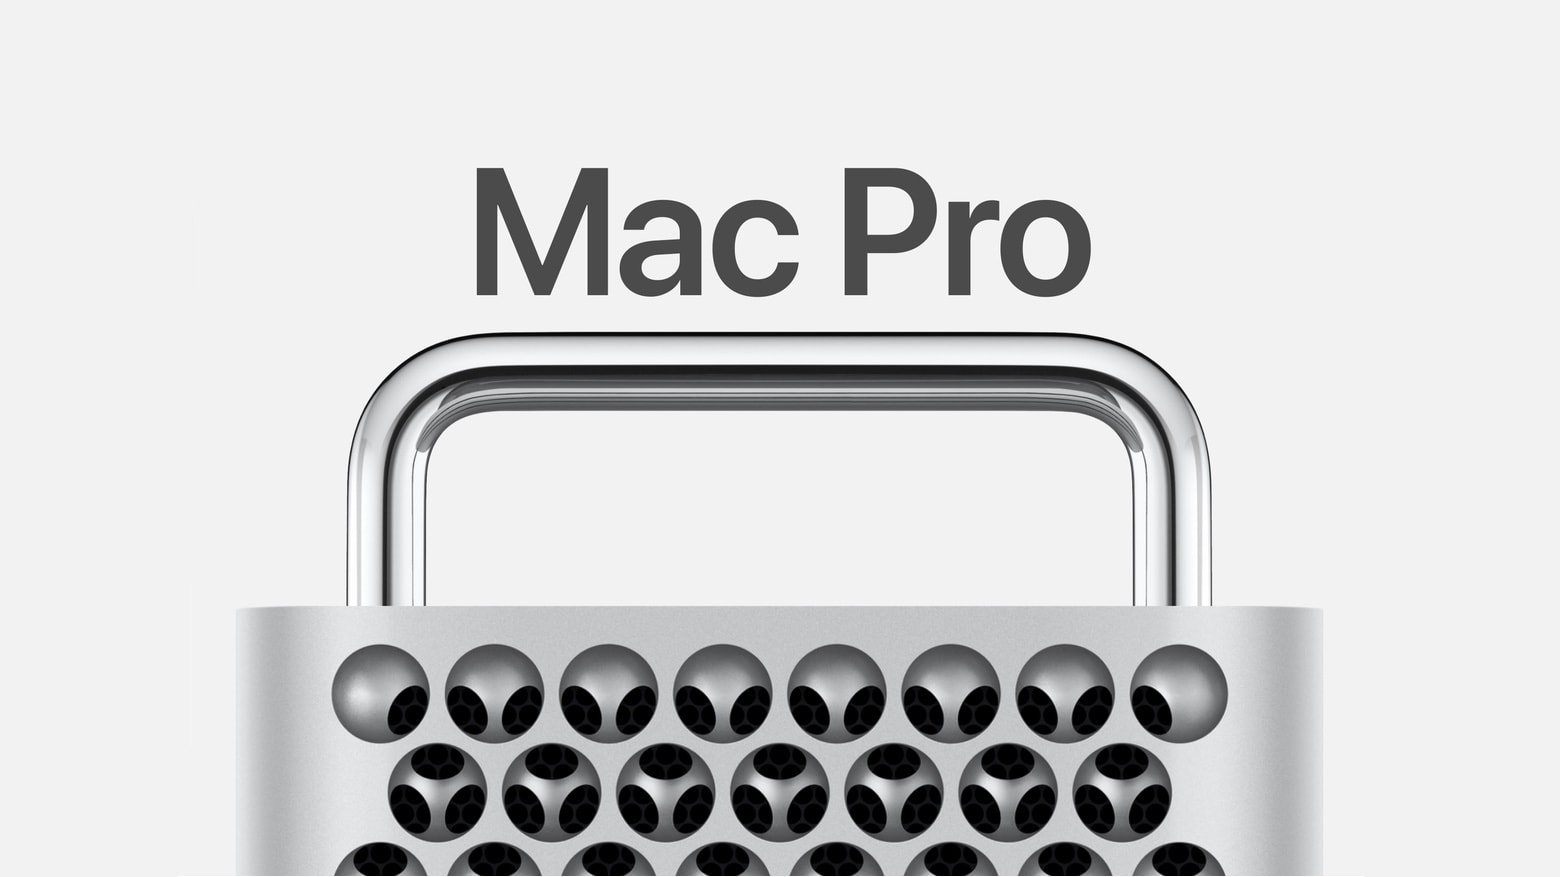 President Trump will tour Apple's Mac Pro factory in Texas this week